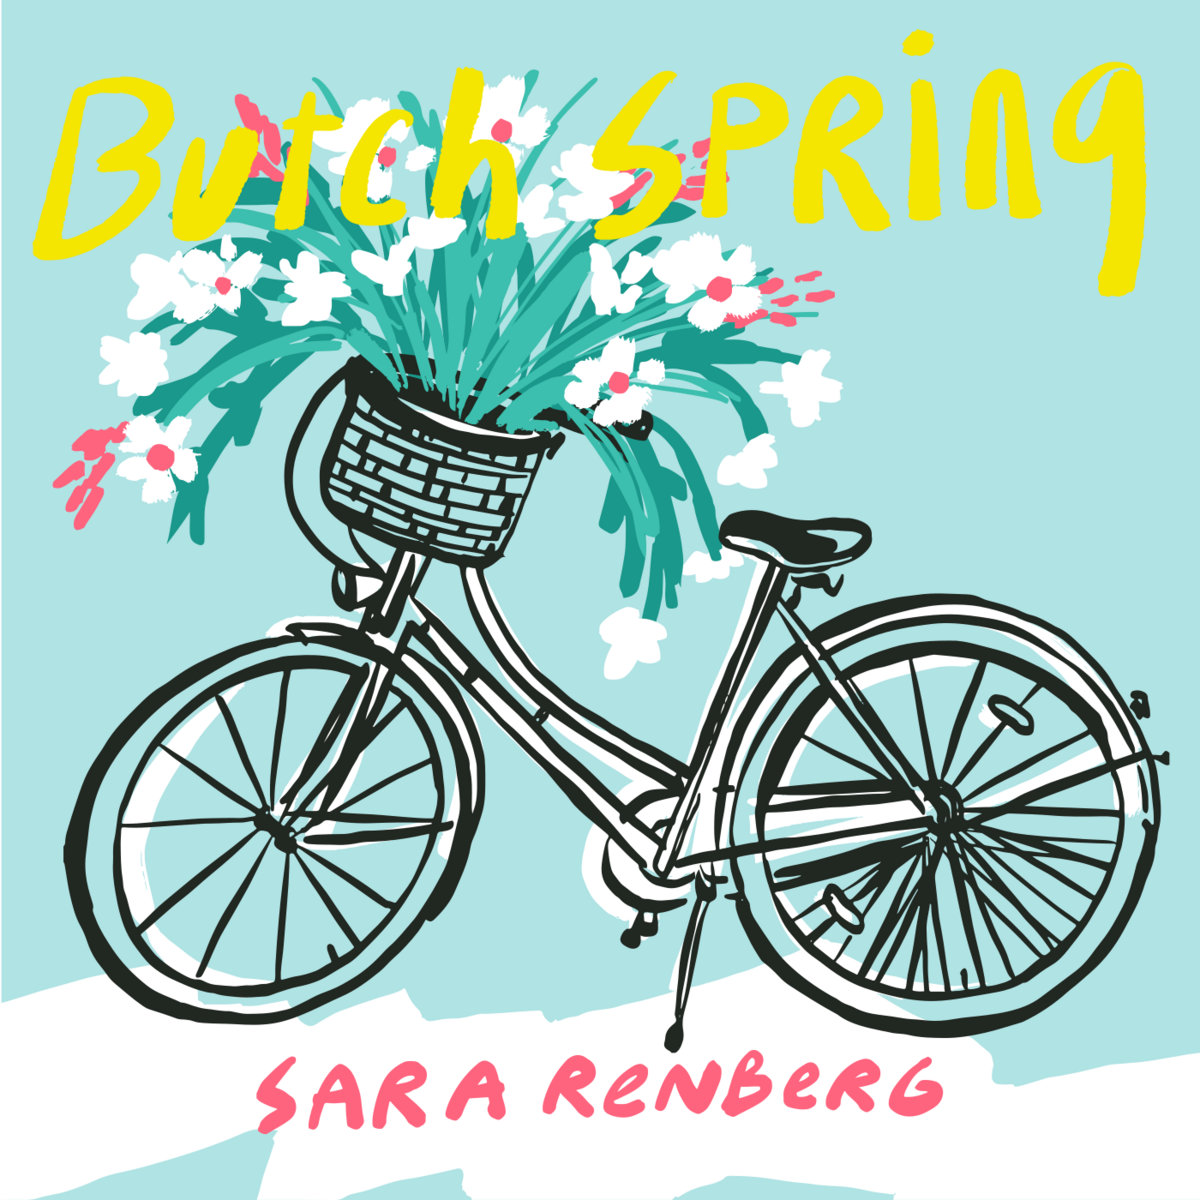 sara renberg butch spring artwork - illustration of bicycle with flowers in the basket